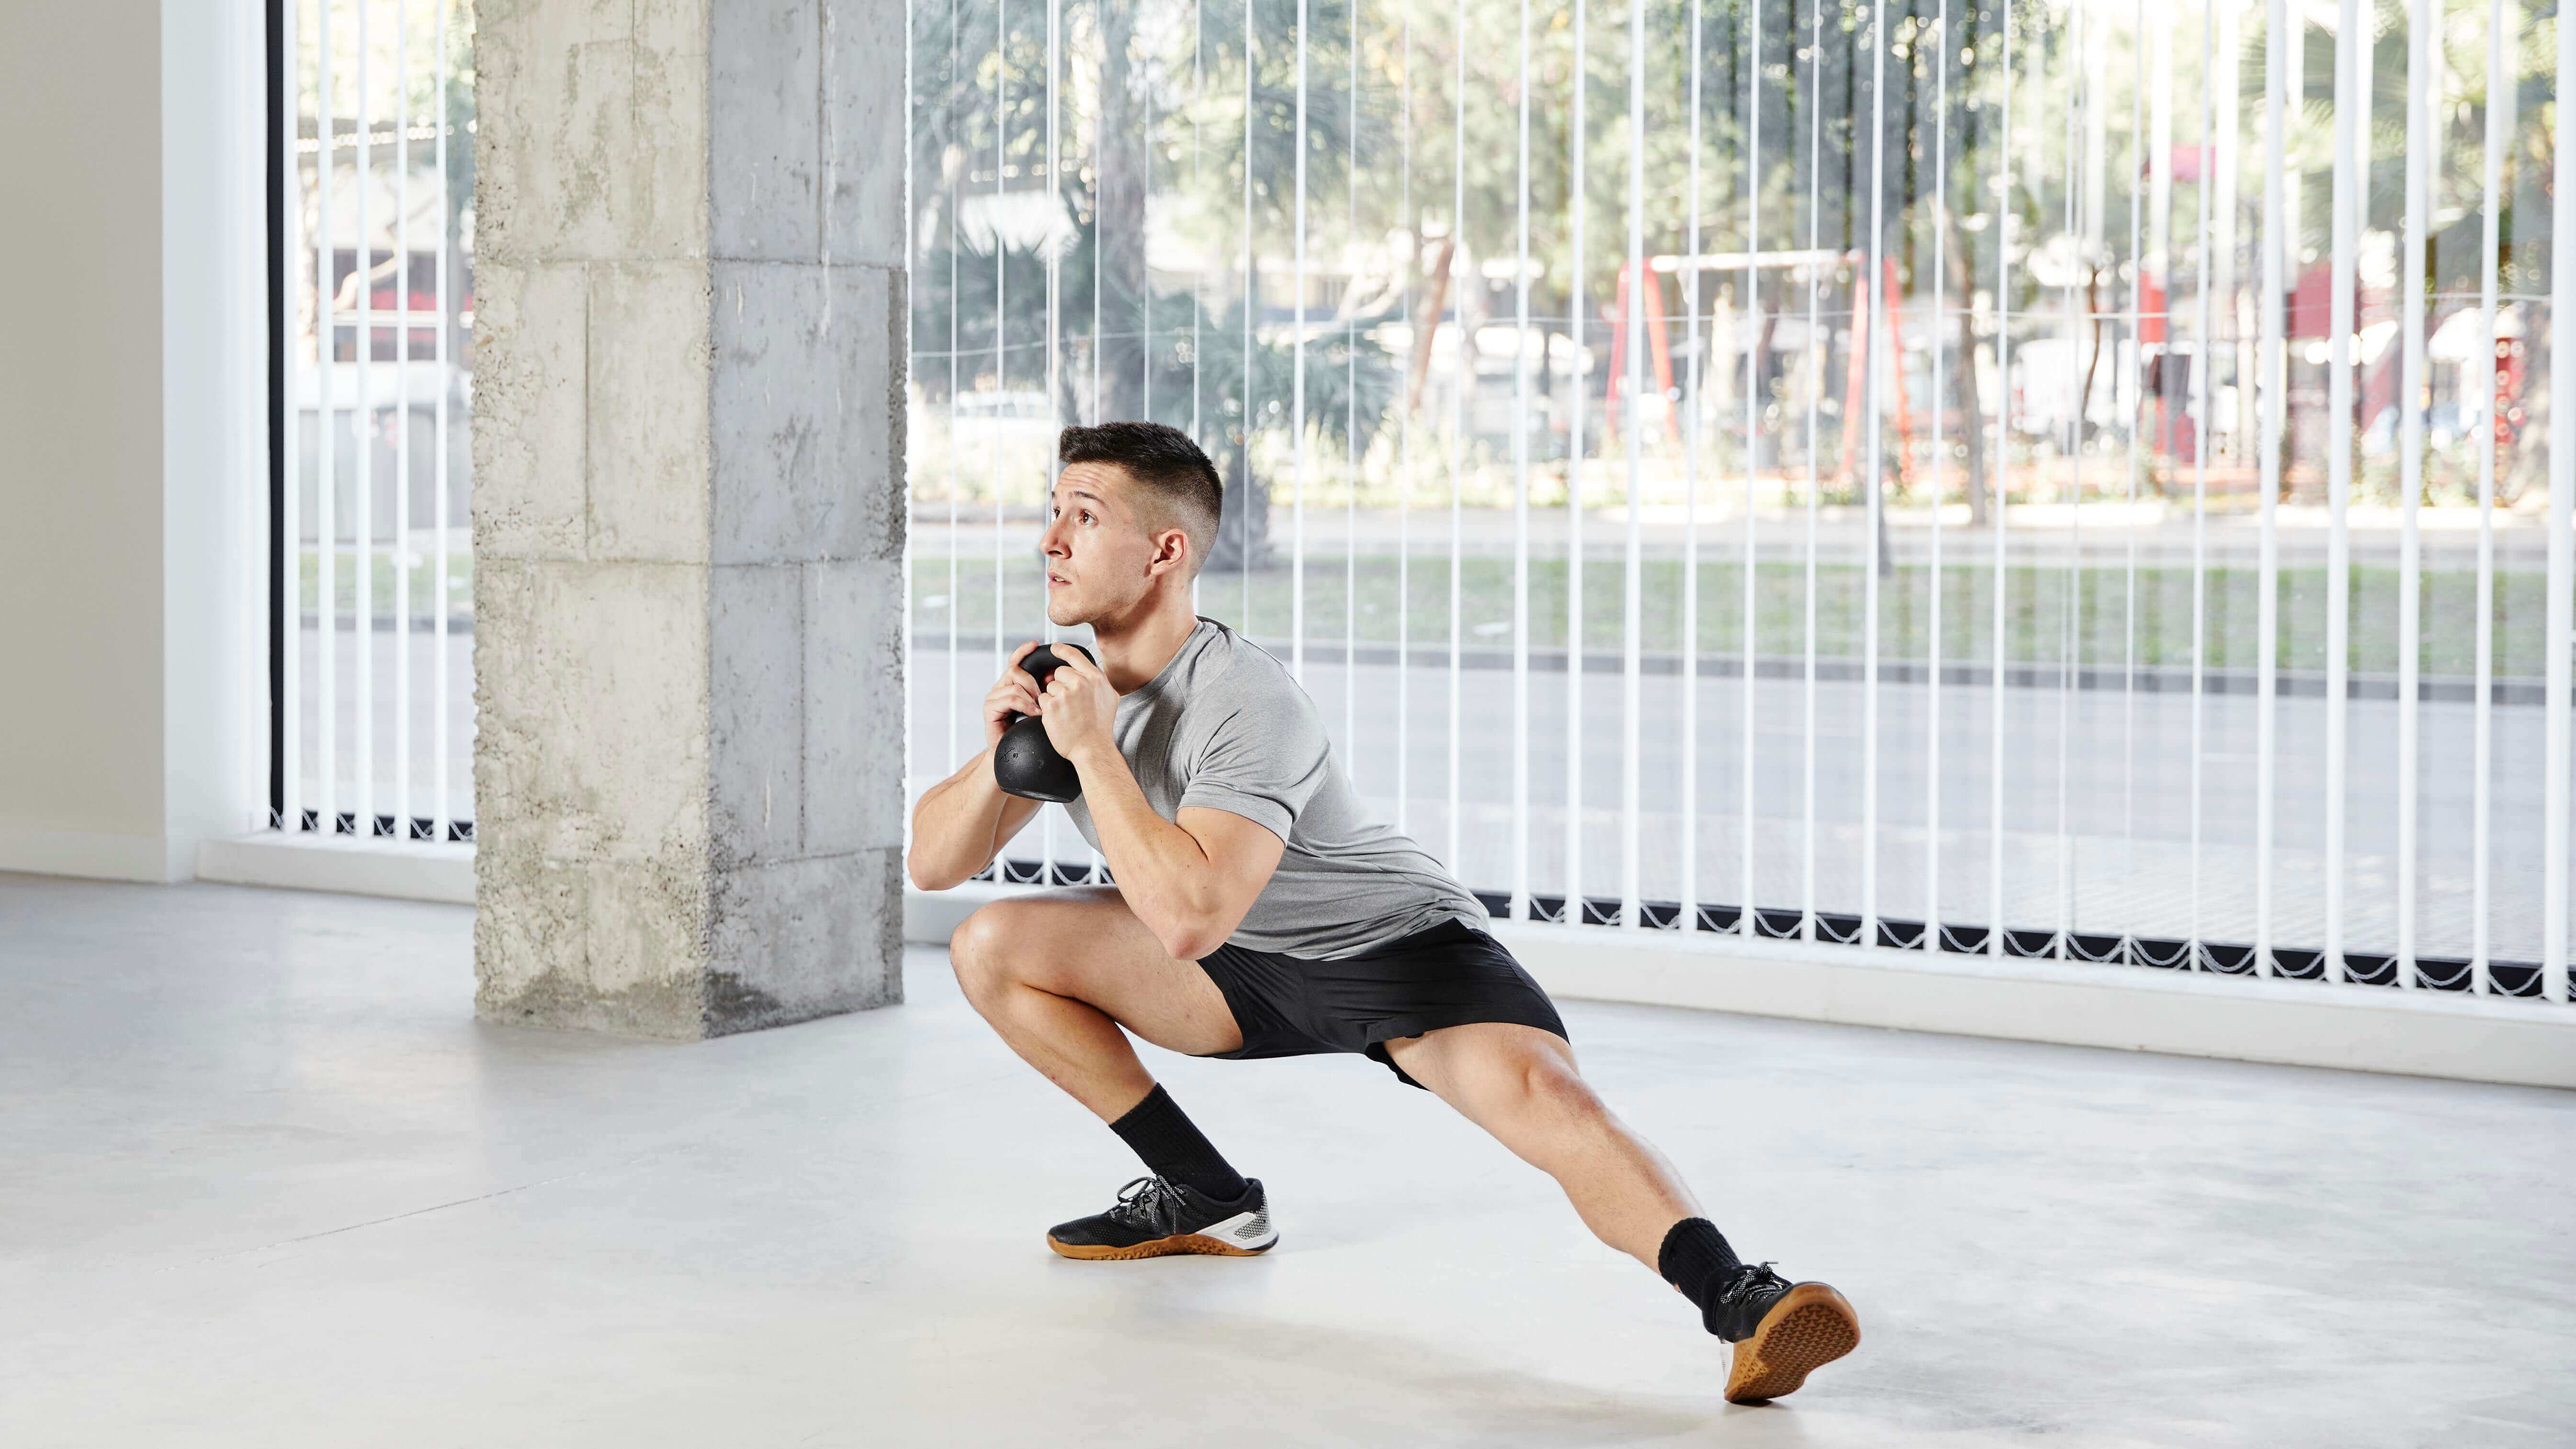 Lunges using a kettlebell